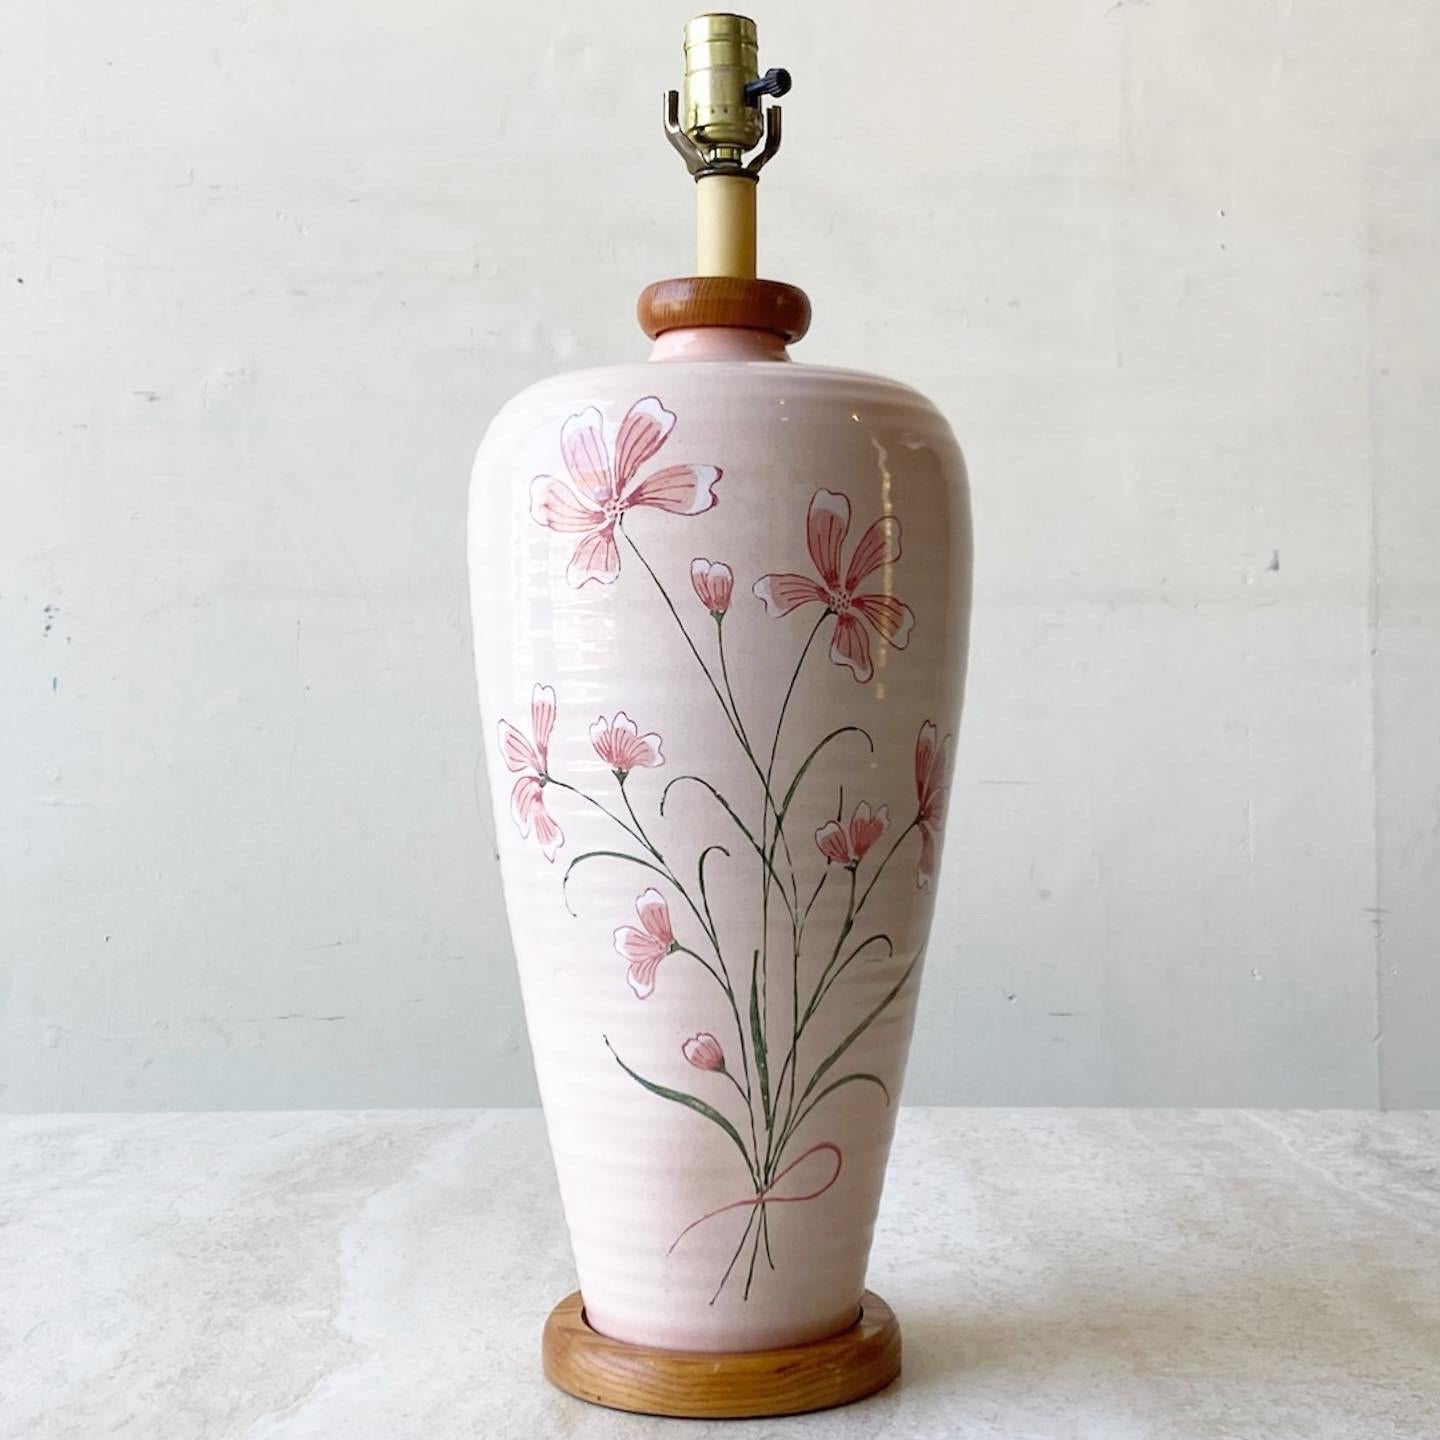 Incredible Mid-Century Modern table lamp. Features hand painted pink flowers over a light pink with a wooden base.
 